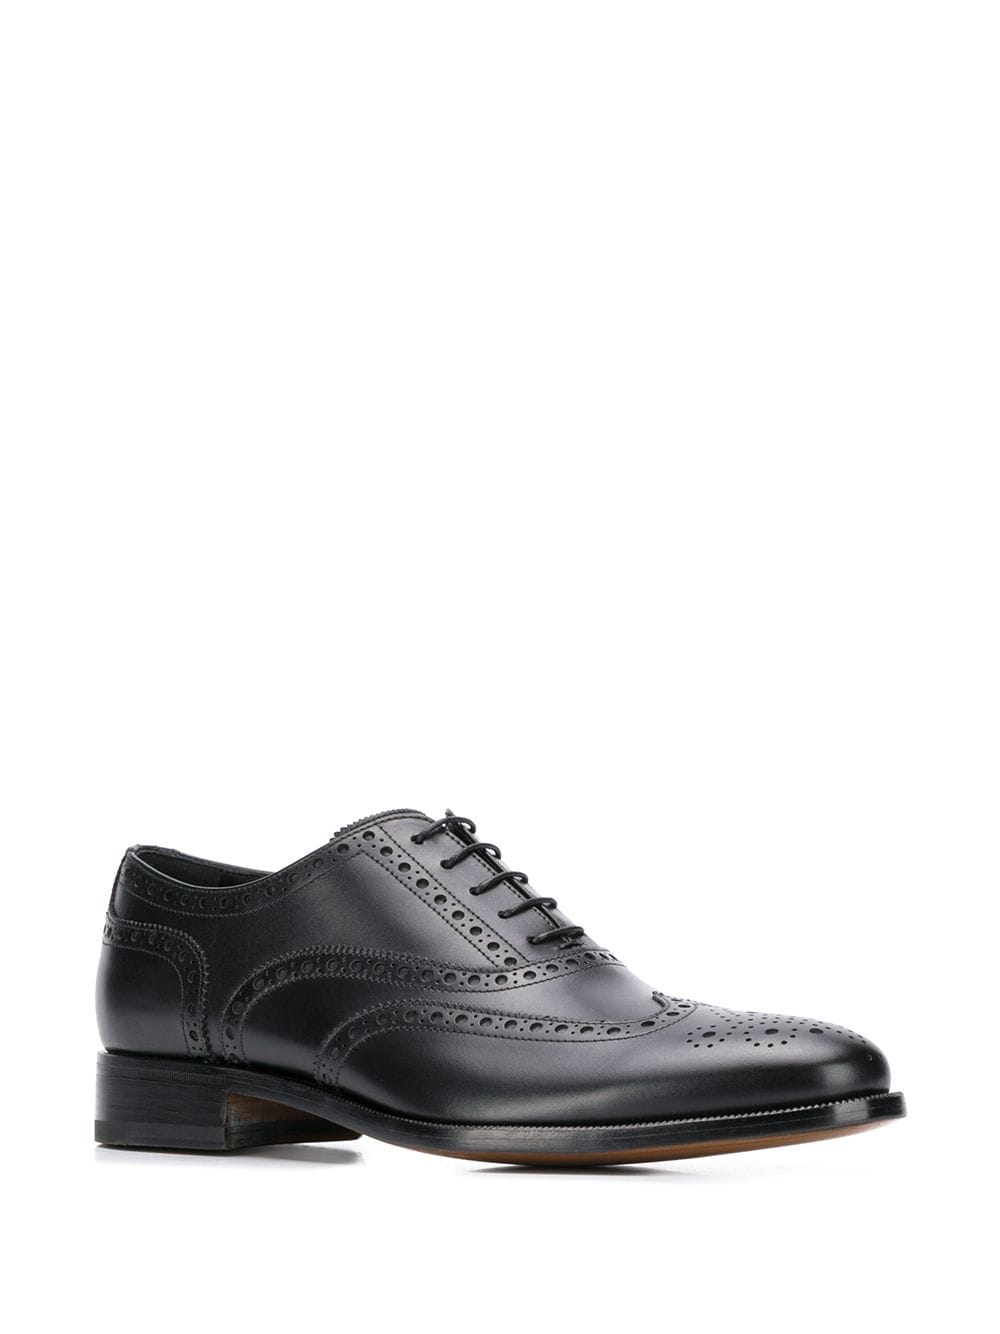 Image 2 of Scarosso Philip Oxford-style brogues